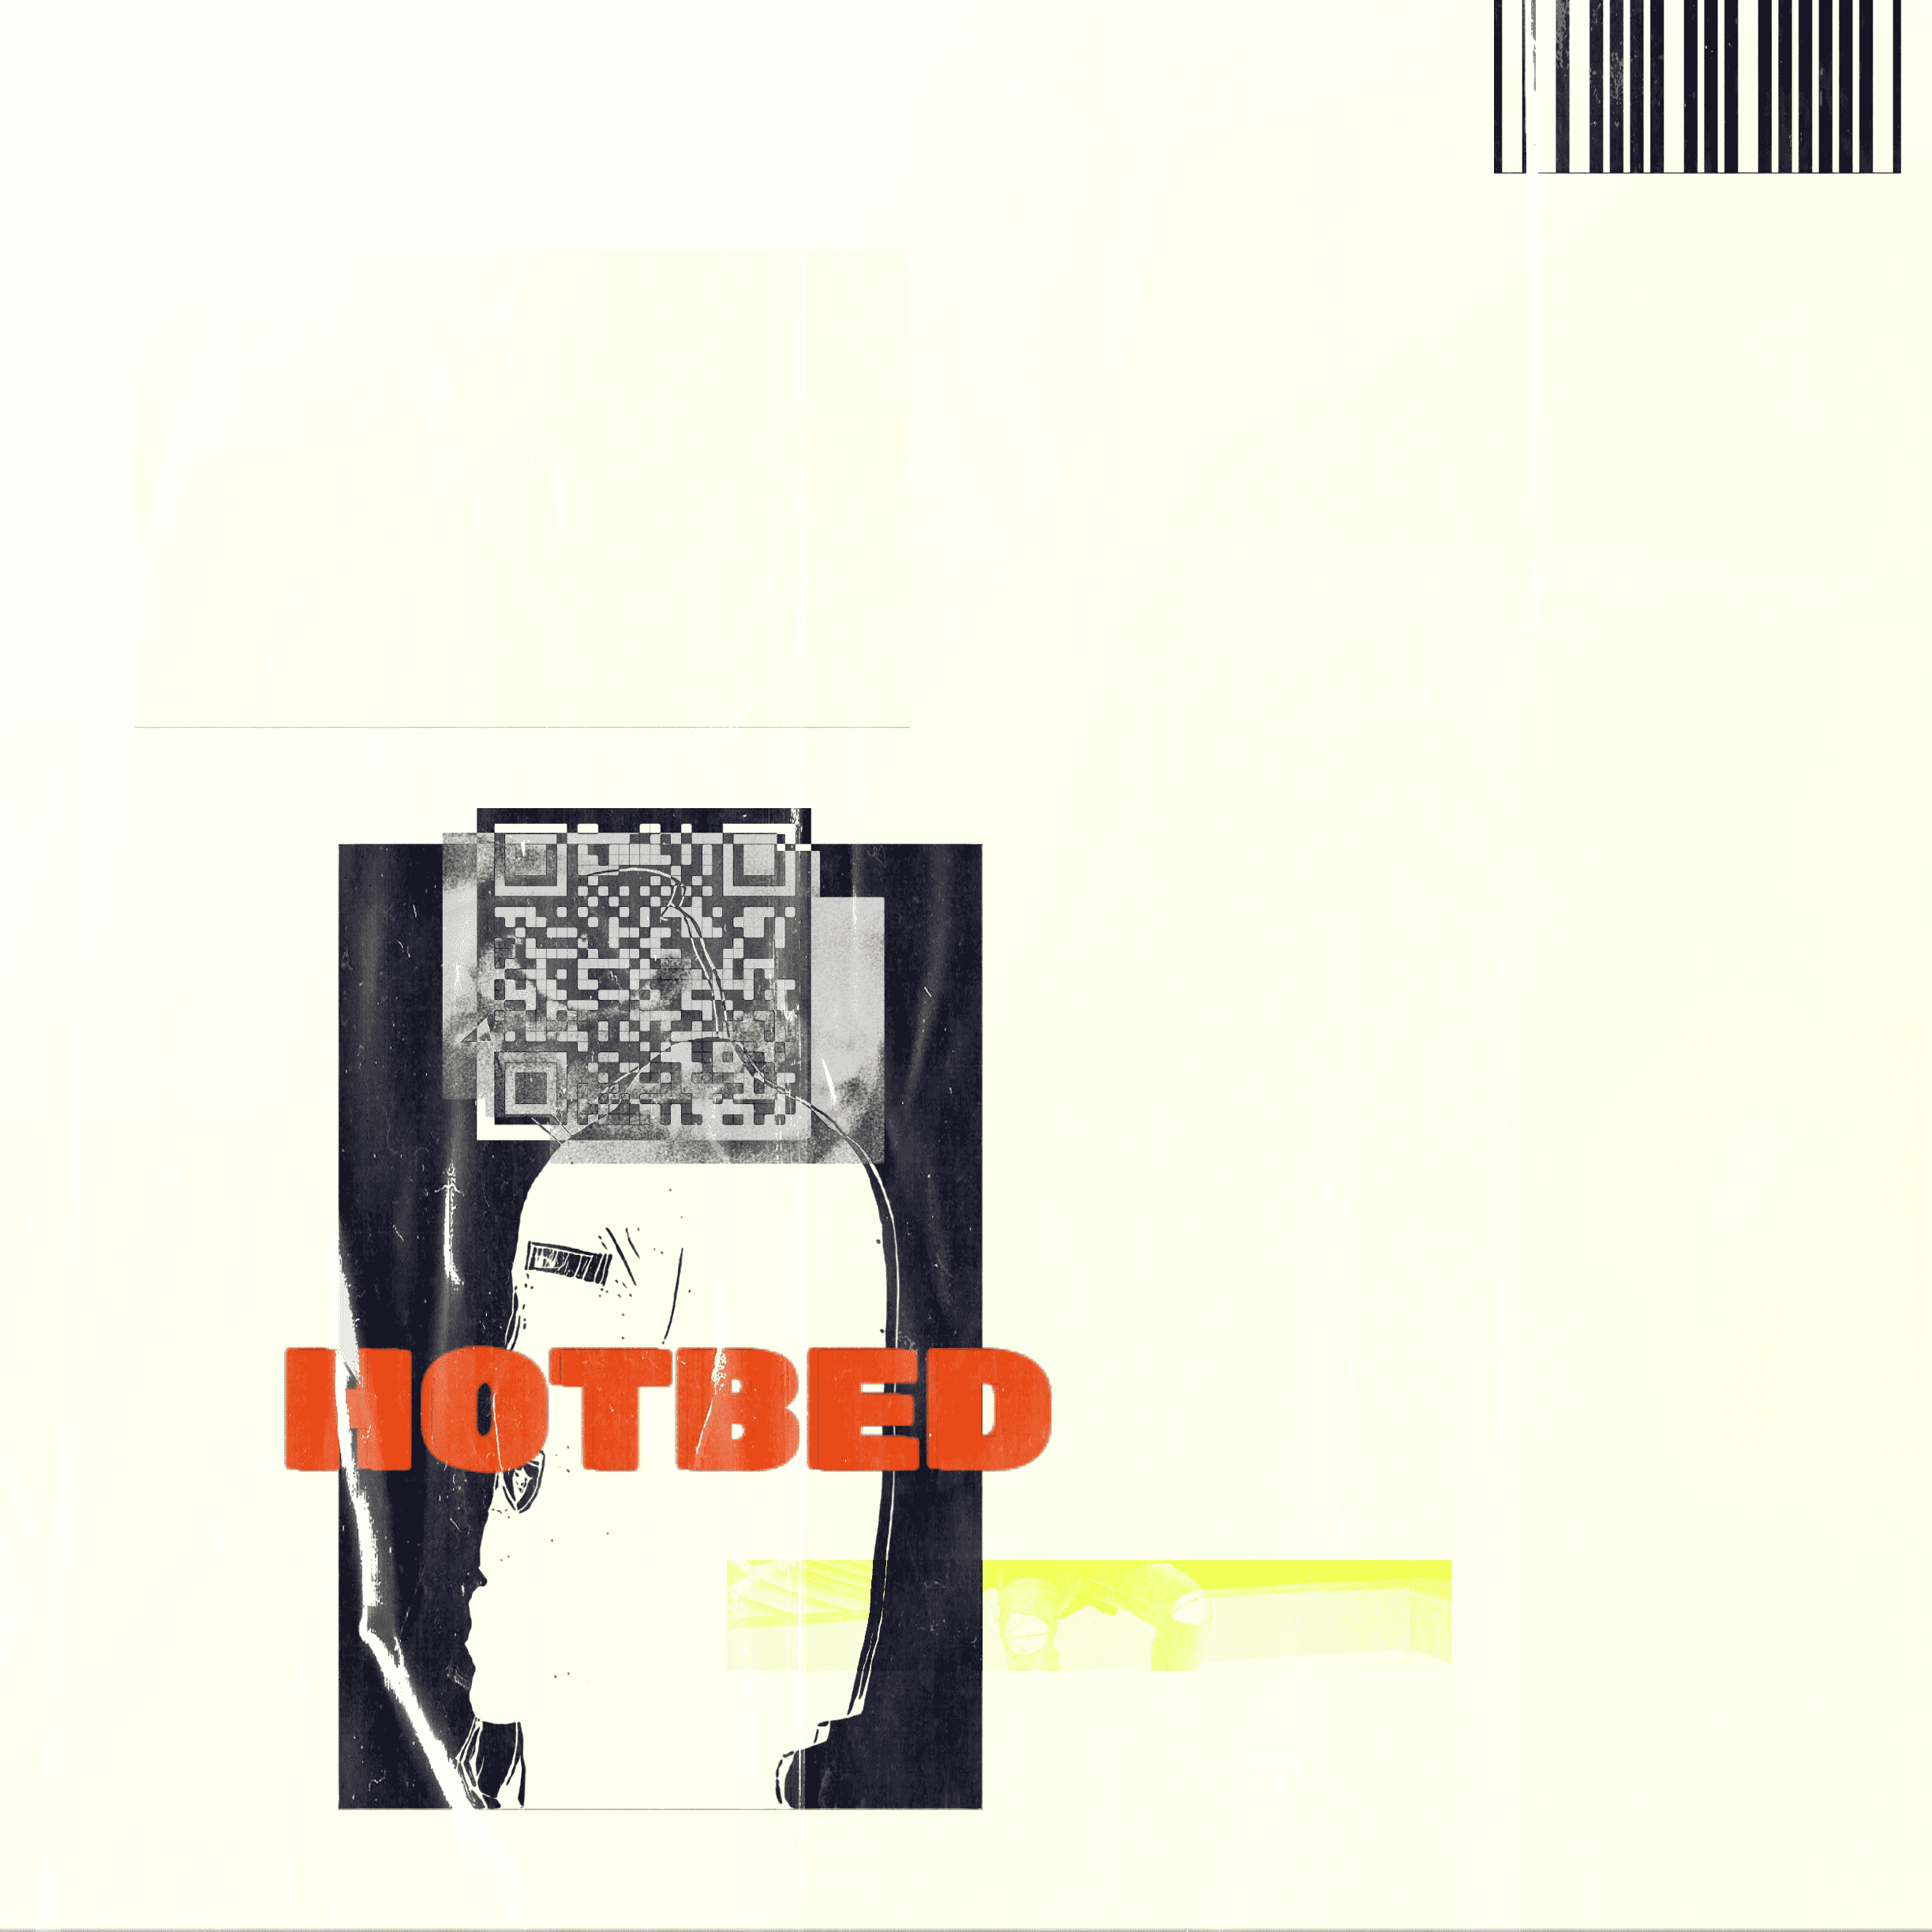 Cover art for HOTBED by bloody white